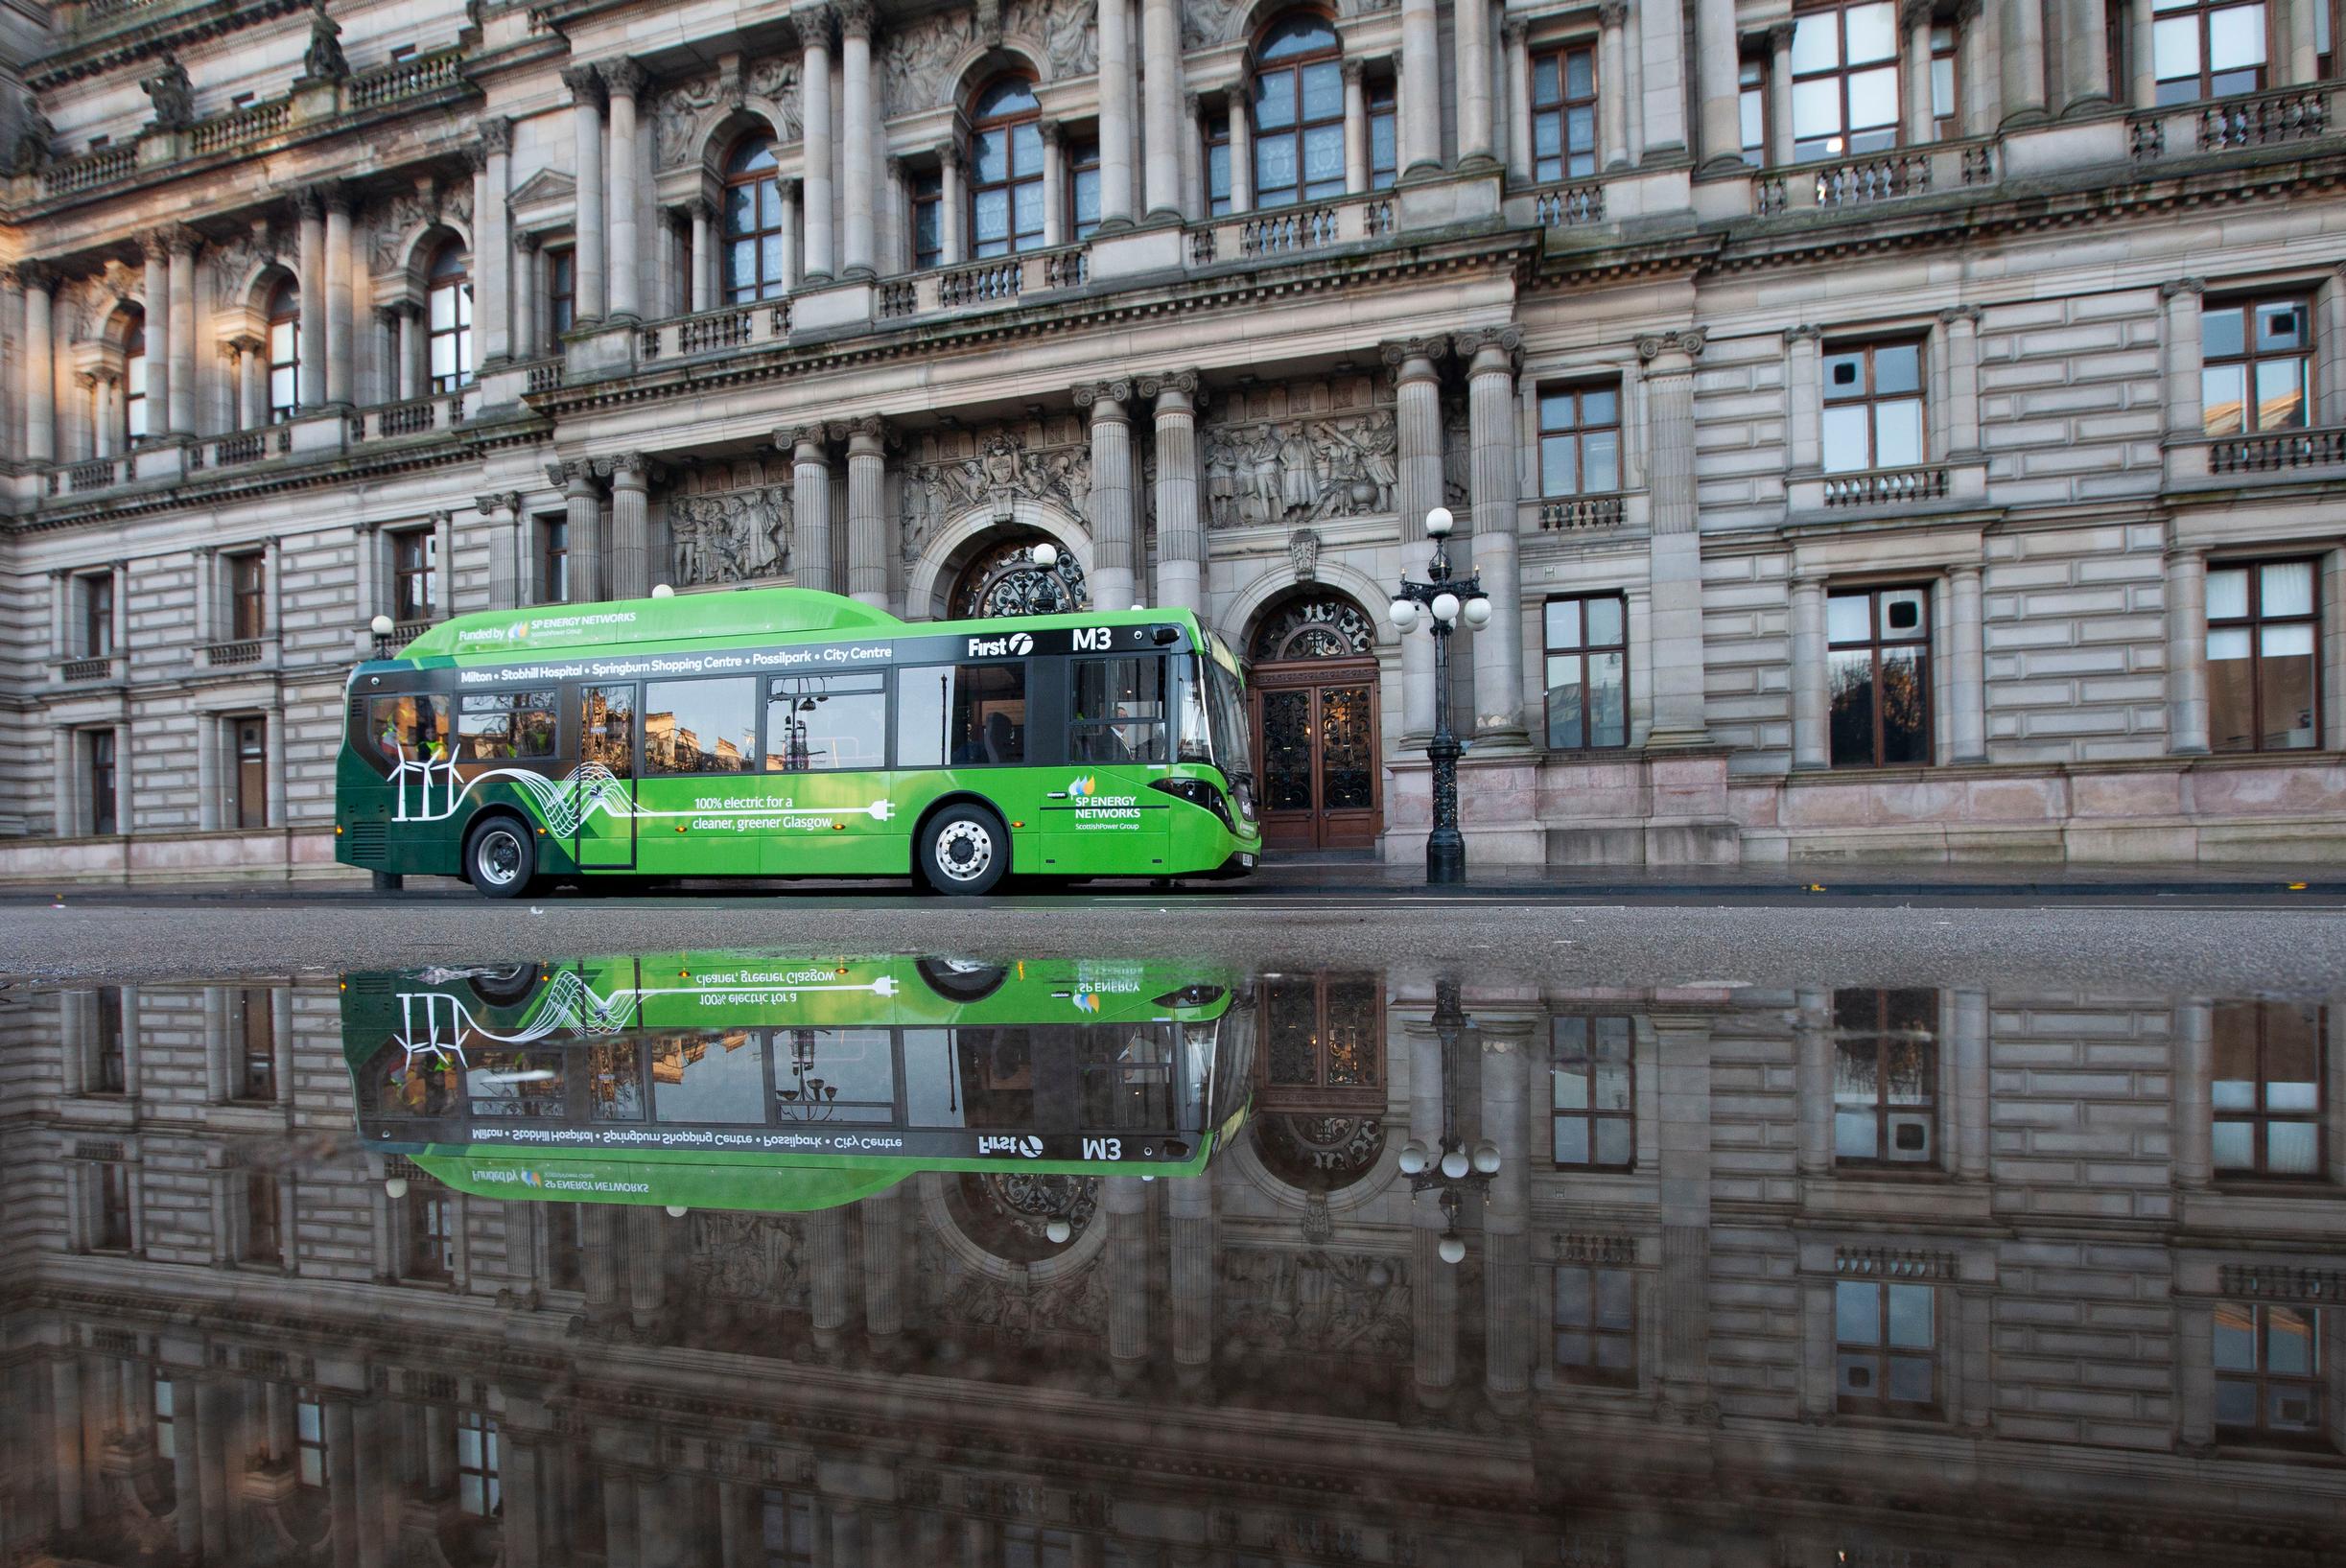 First Bus, which has been trialling two fully electric buses in Glasgow